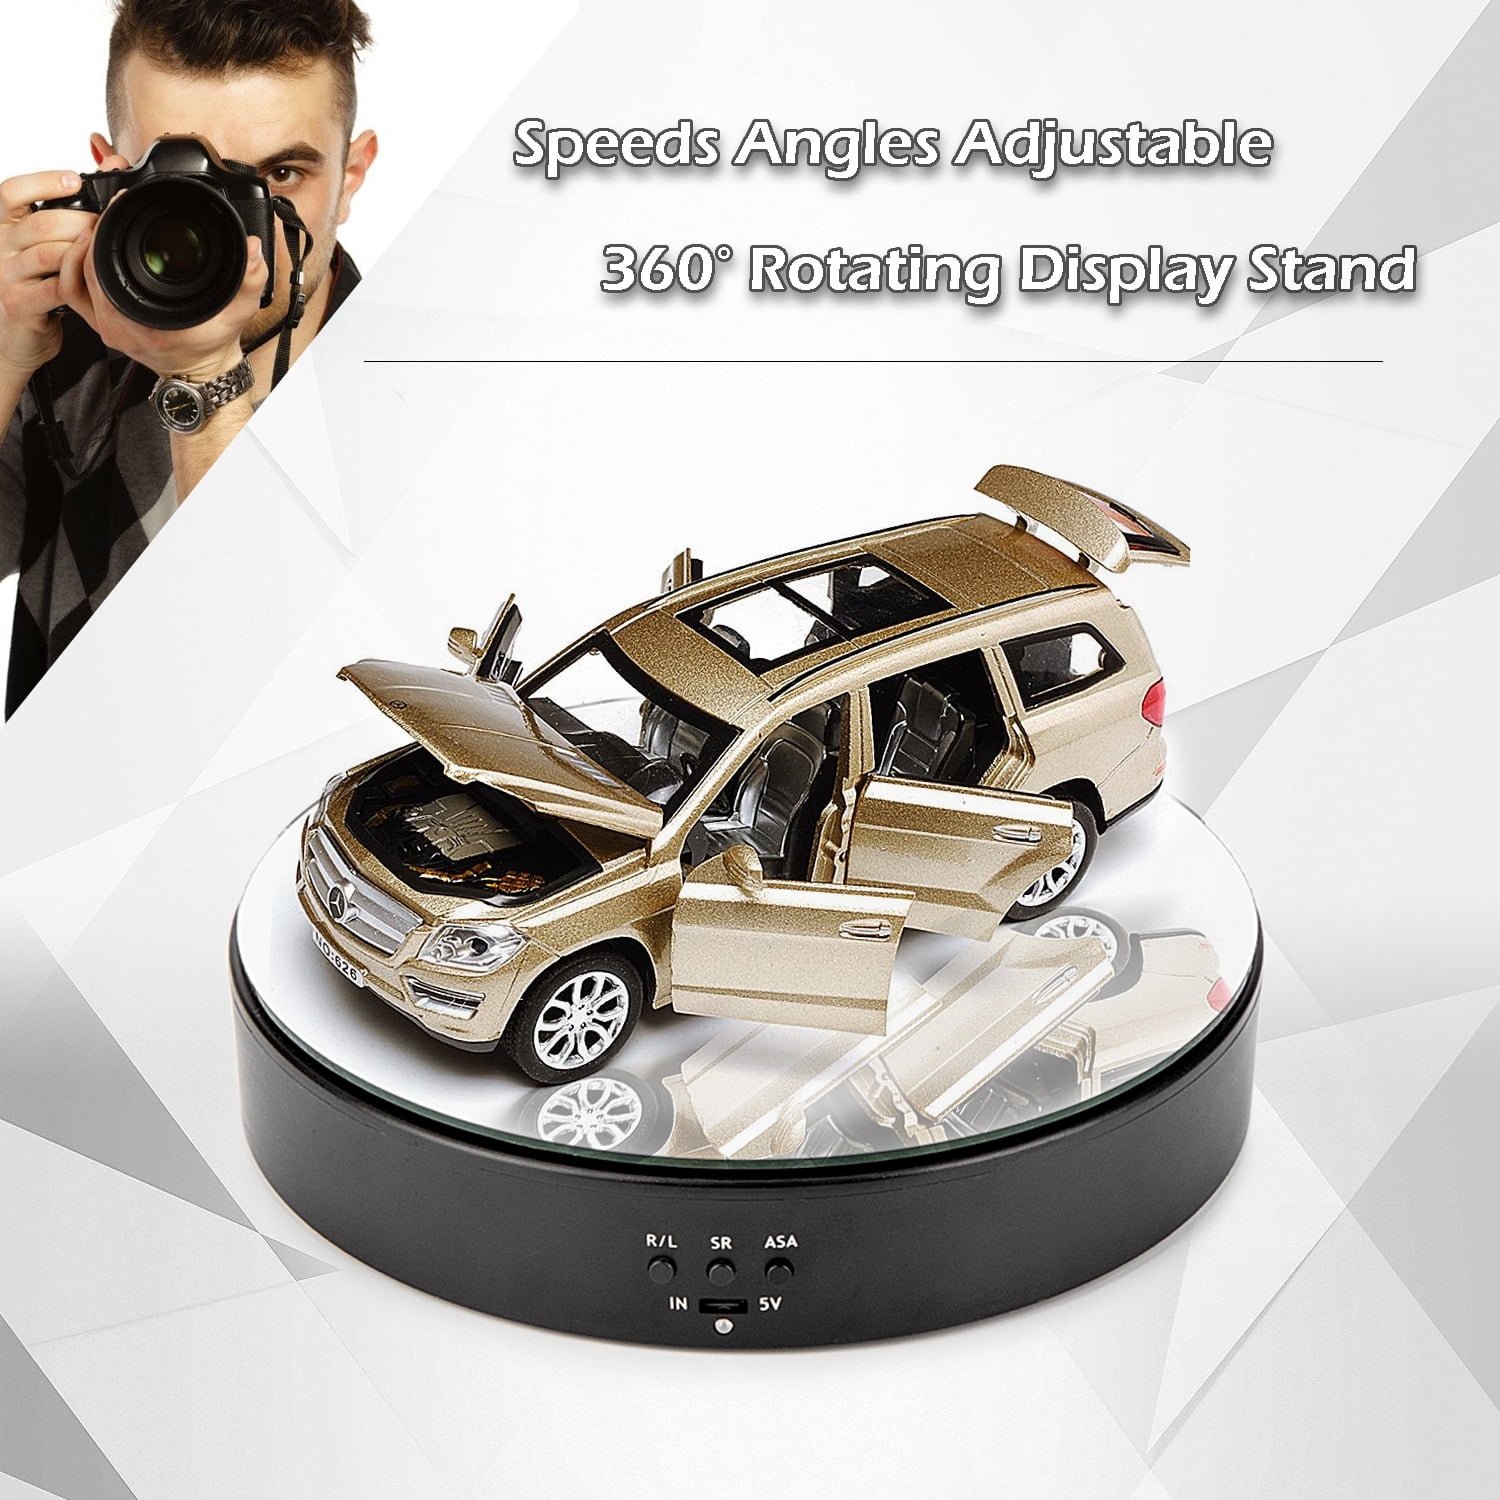  Leadleds Motorized Rotating Display Stand, 360 Degree Rotation  7.7 Top Mirror, Rotation Speed and Angle Adjustable Display Turntable for  Photography, Video, Product Display (White) : Electronics